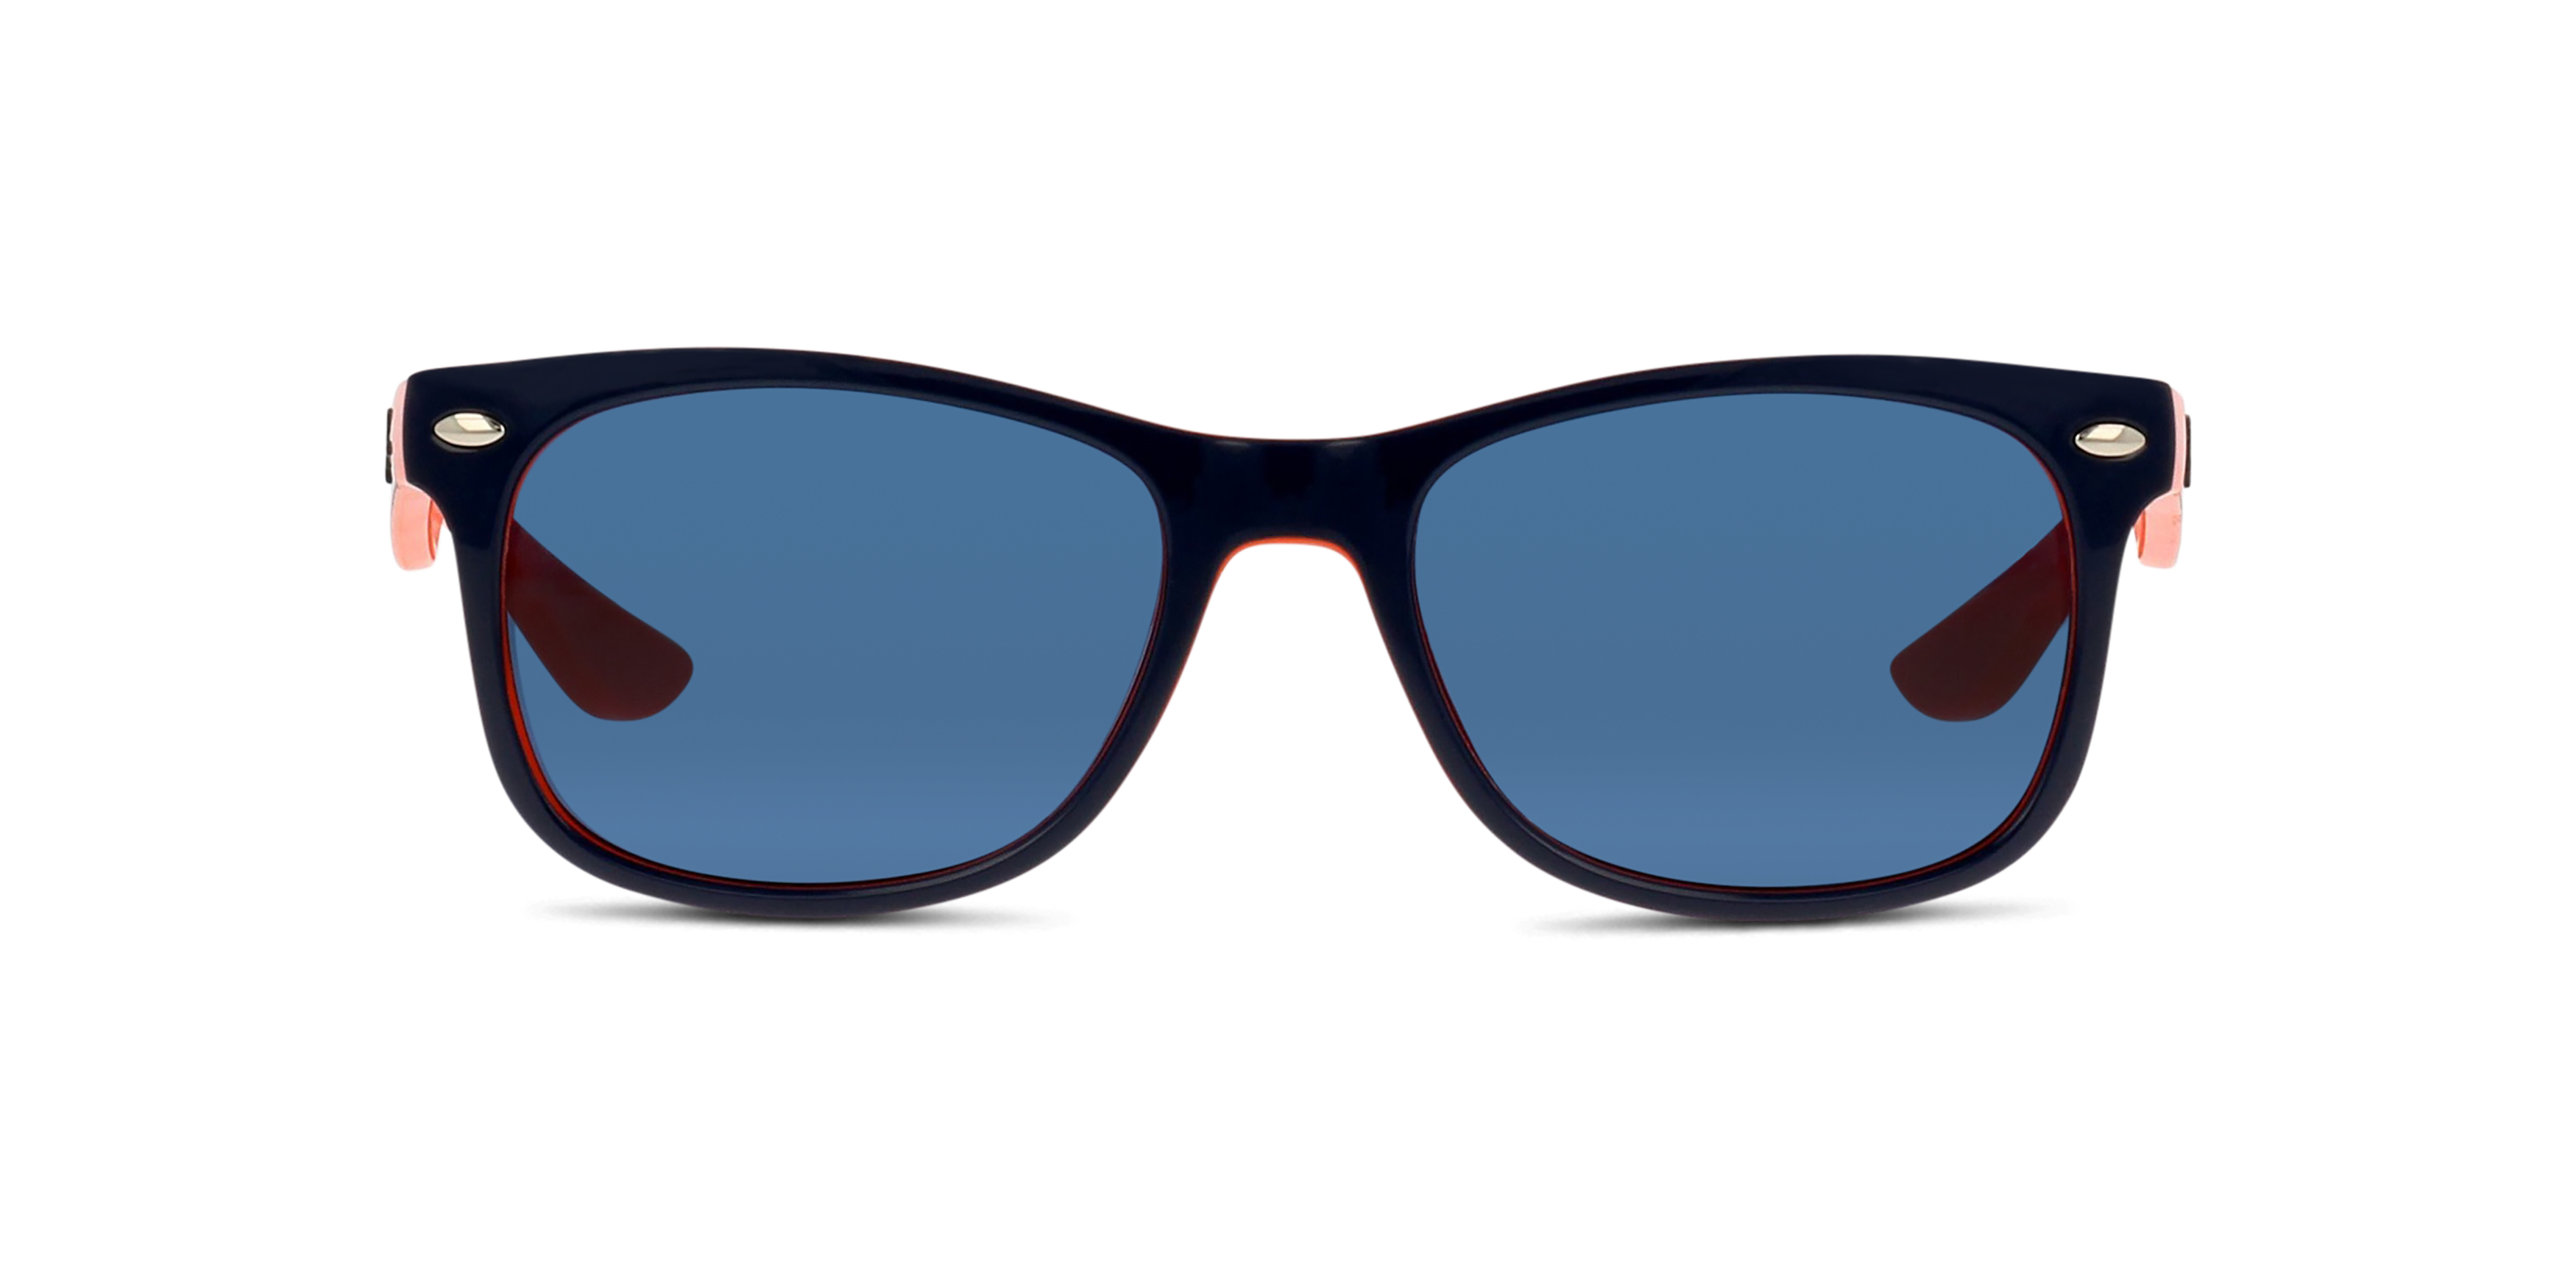 [products.image.front] Ray-Ban Junior New Wayfarer RJ9052S 178/80